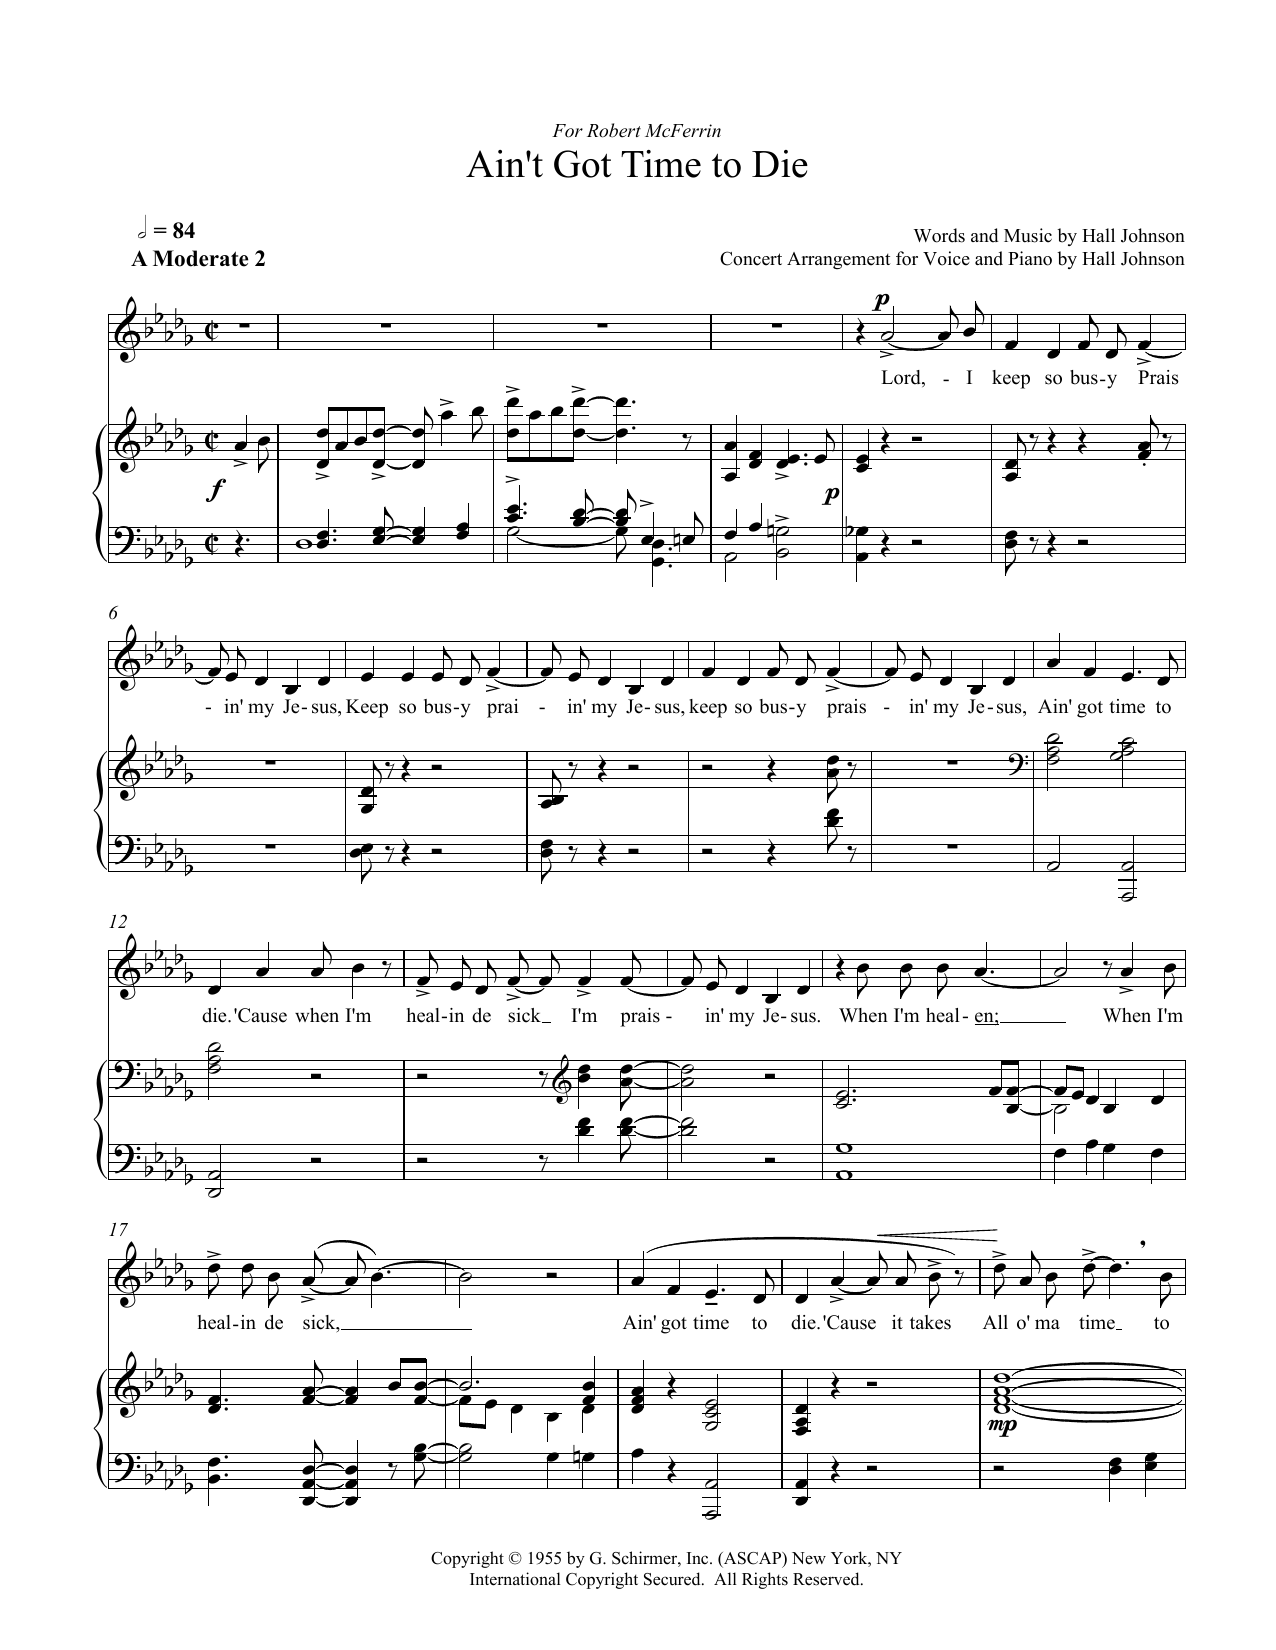 Download Hall Johnson Ain't Got Time to Die (D-flat) Sheet Music